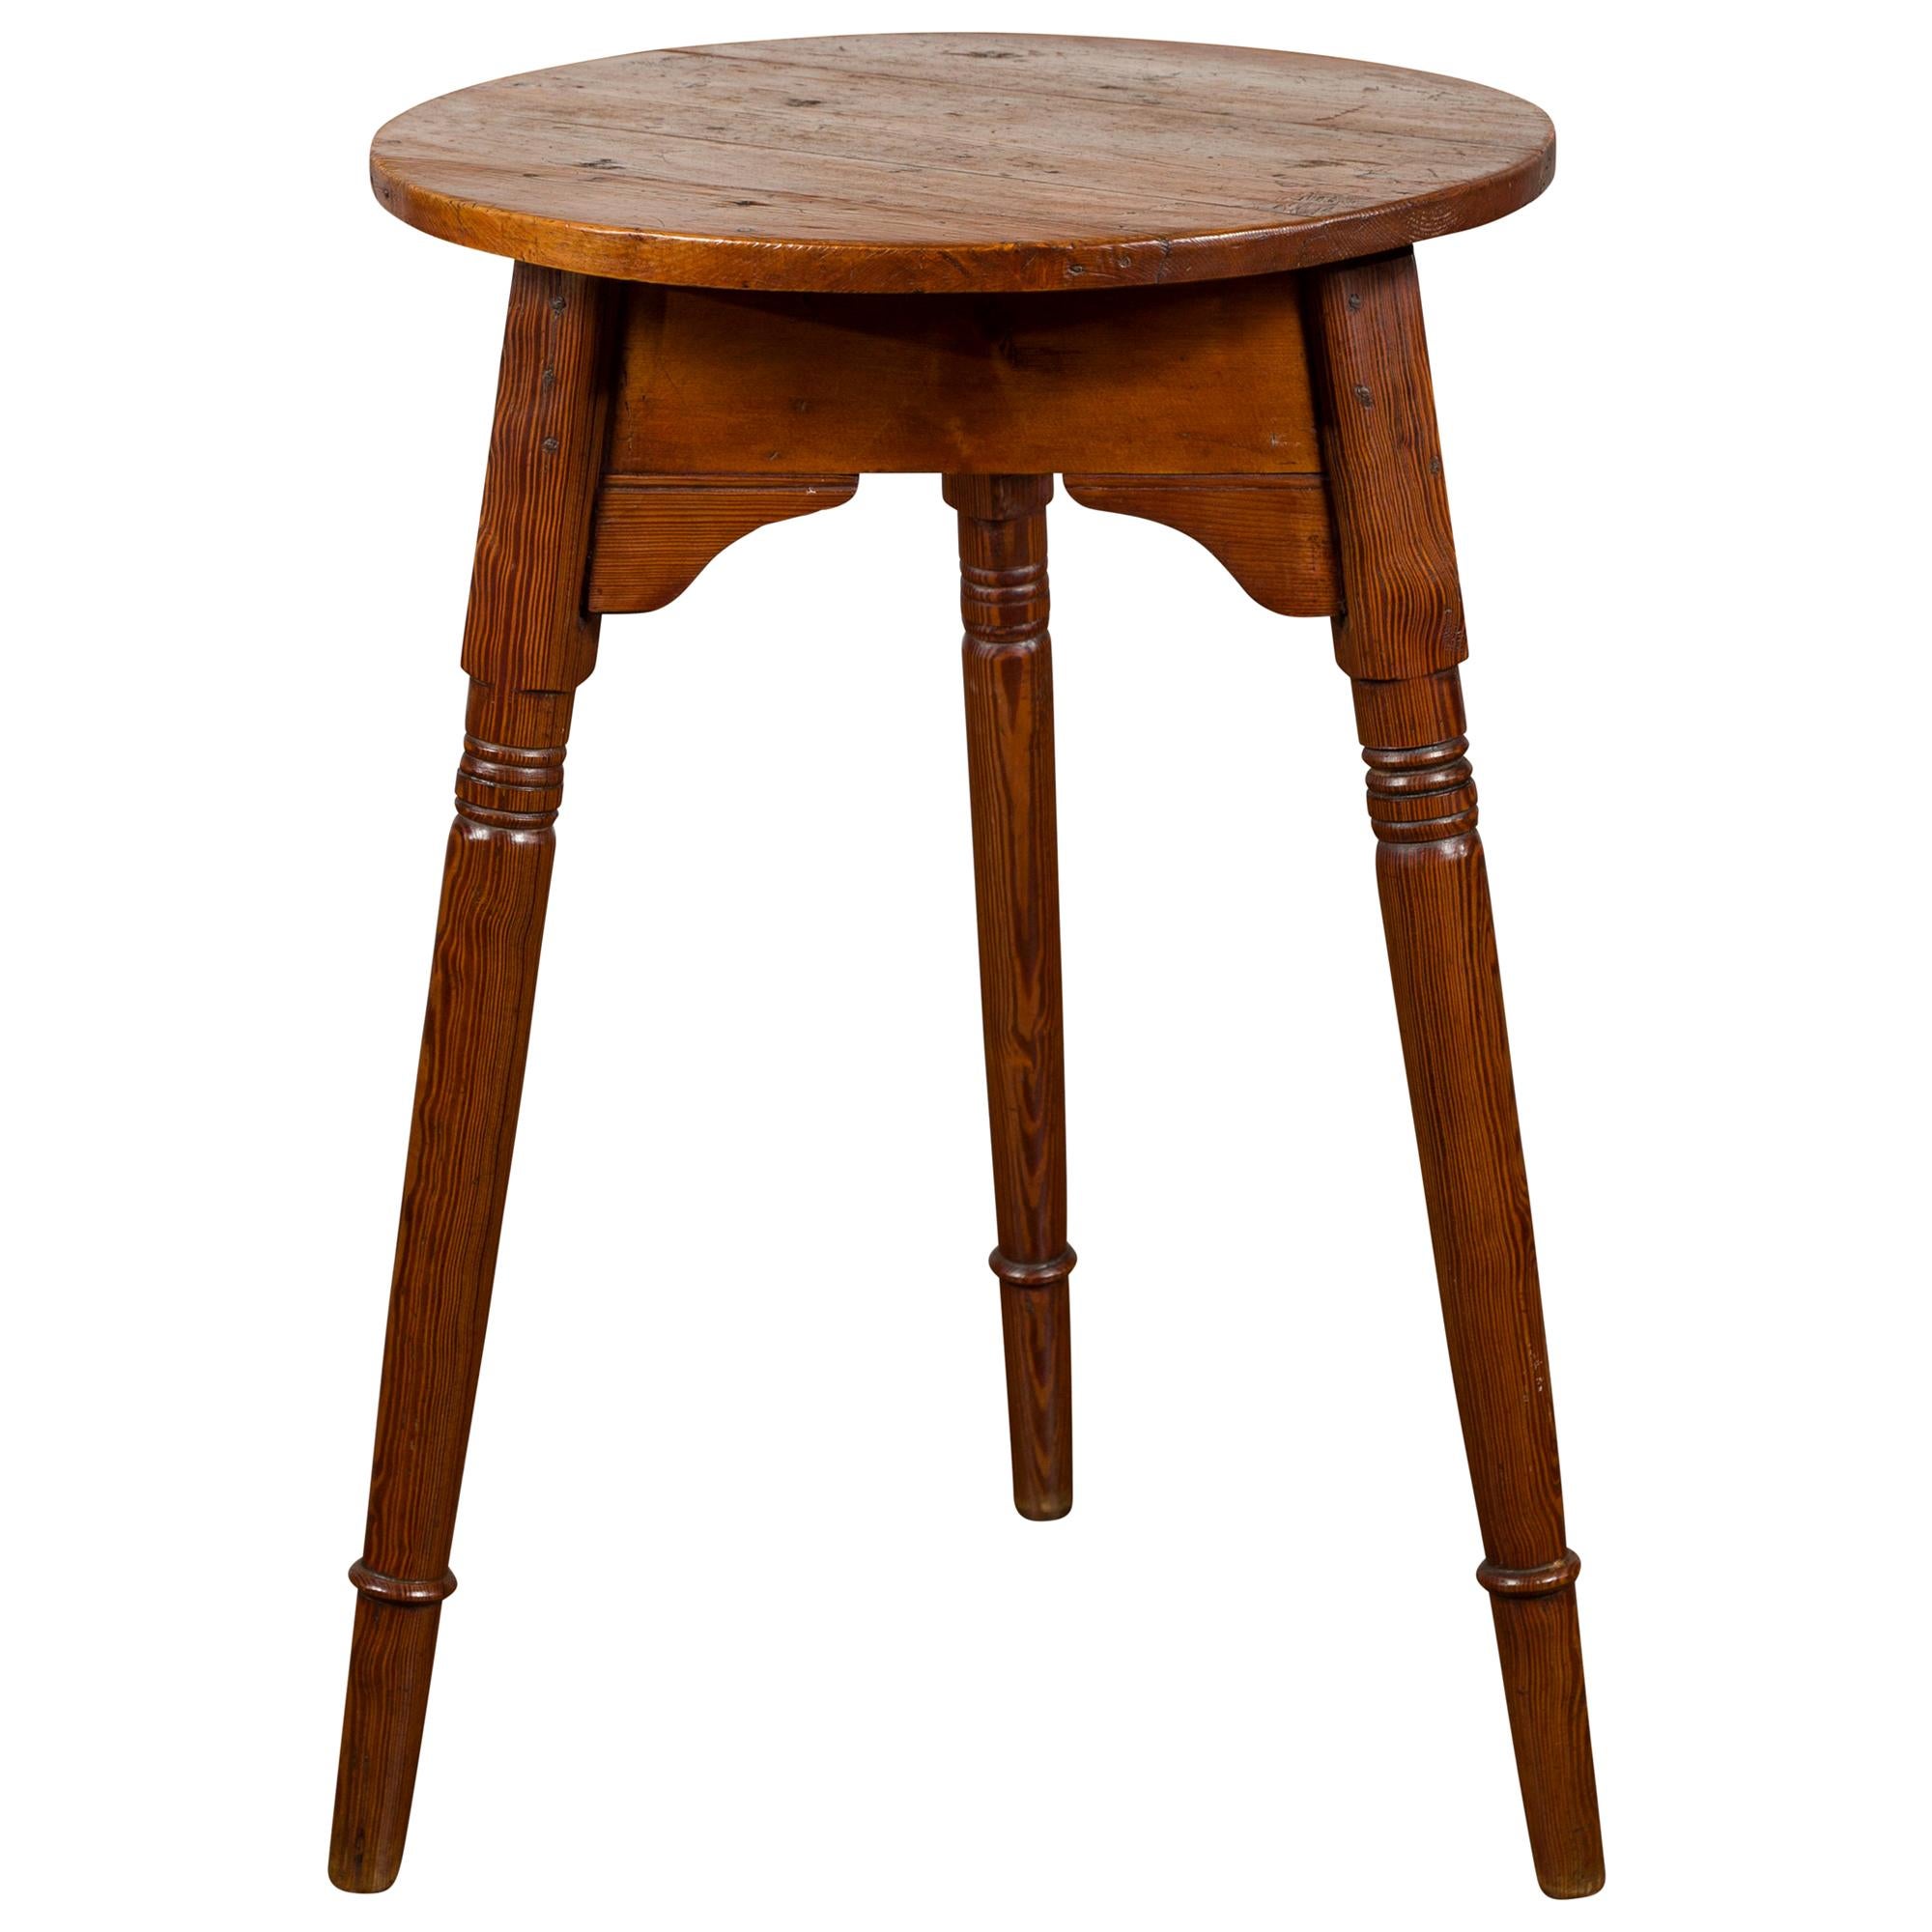 Small English 1840s Pine Cricket Table with Carved Apron and Turned Legs